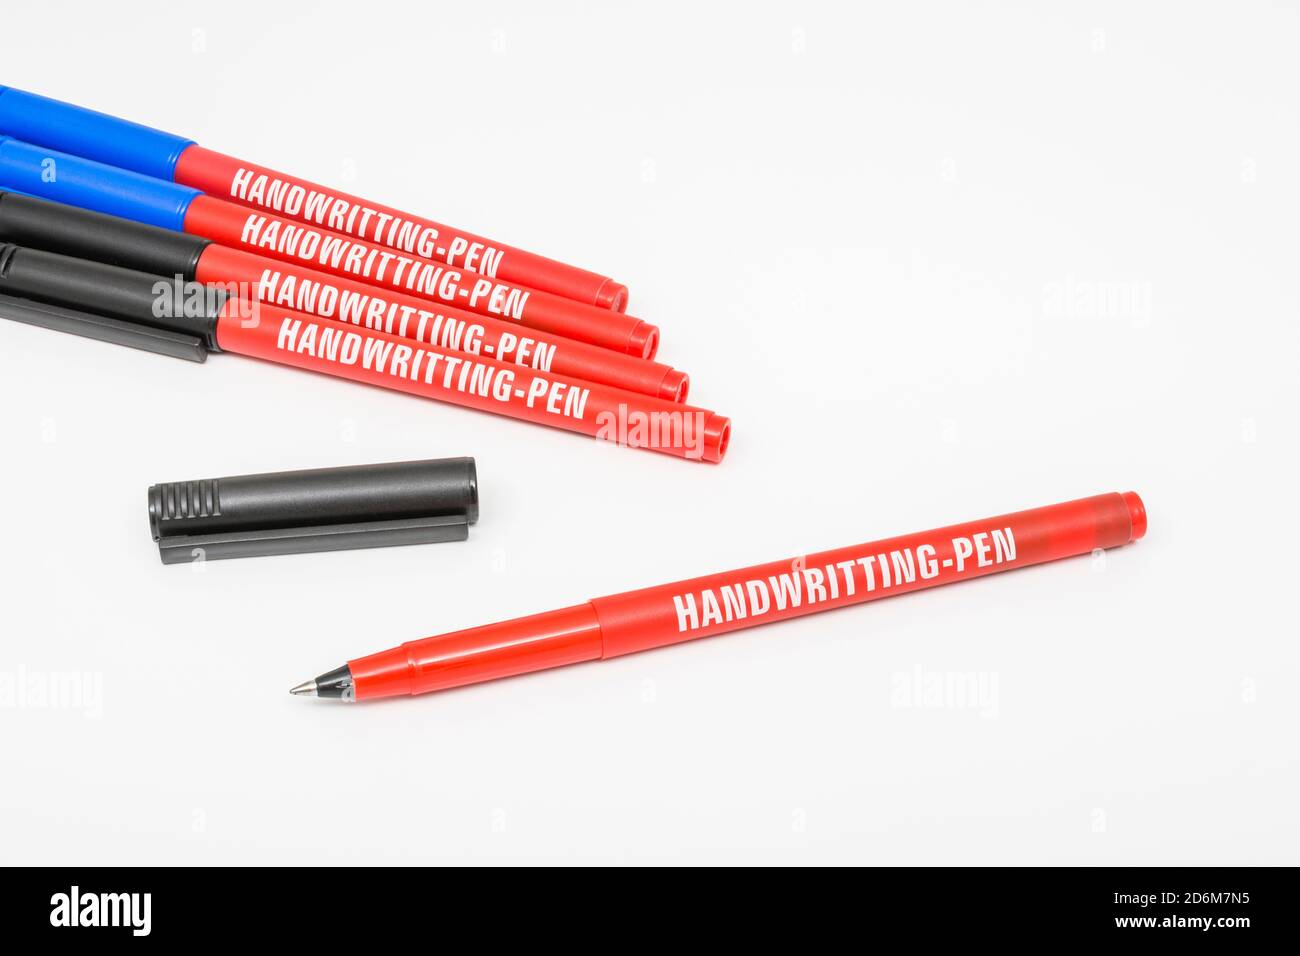 https://c8.alamy.com/comp/2D6M7N5/own-brand-poundland-roller-pens-with-word-handwriting-misspelled-on-an-off-white-bg-for-typo-misprint-poor-spelling-bad-english-writing-error-2D6M7N5.jpg